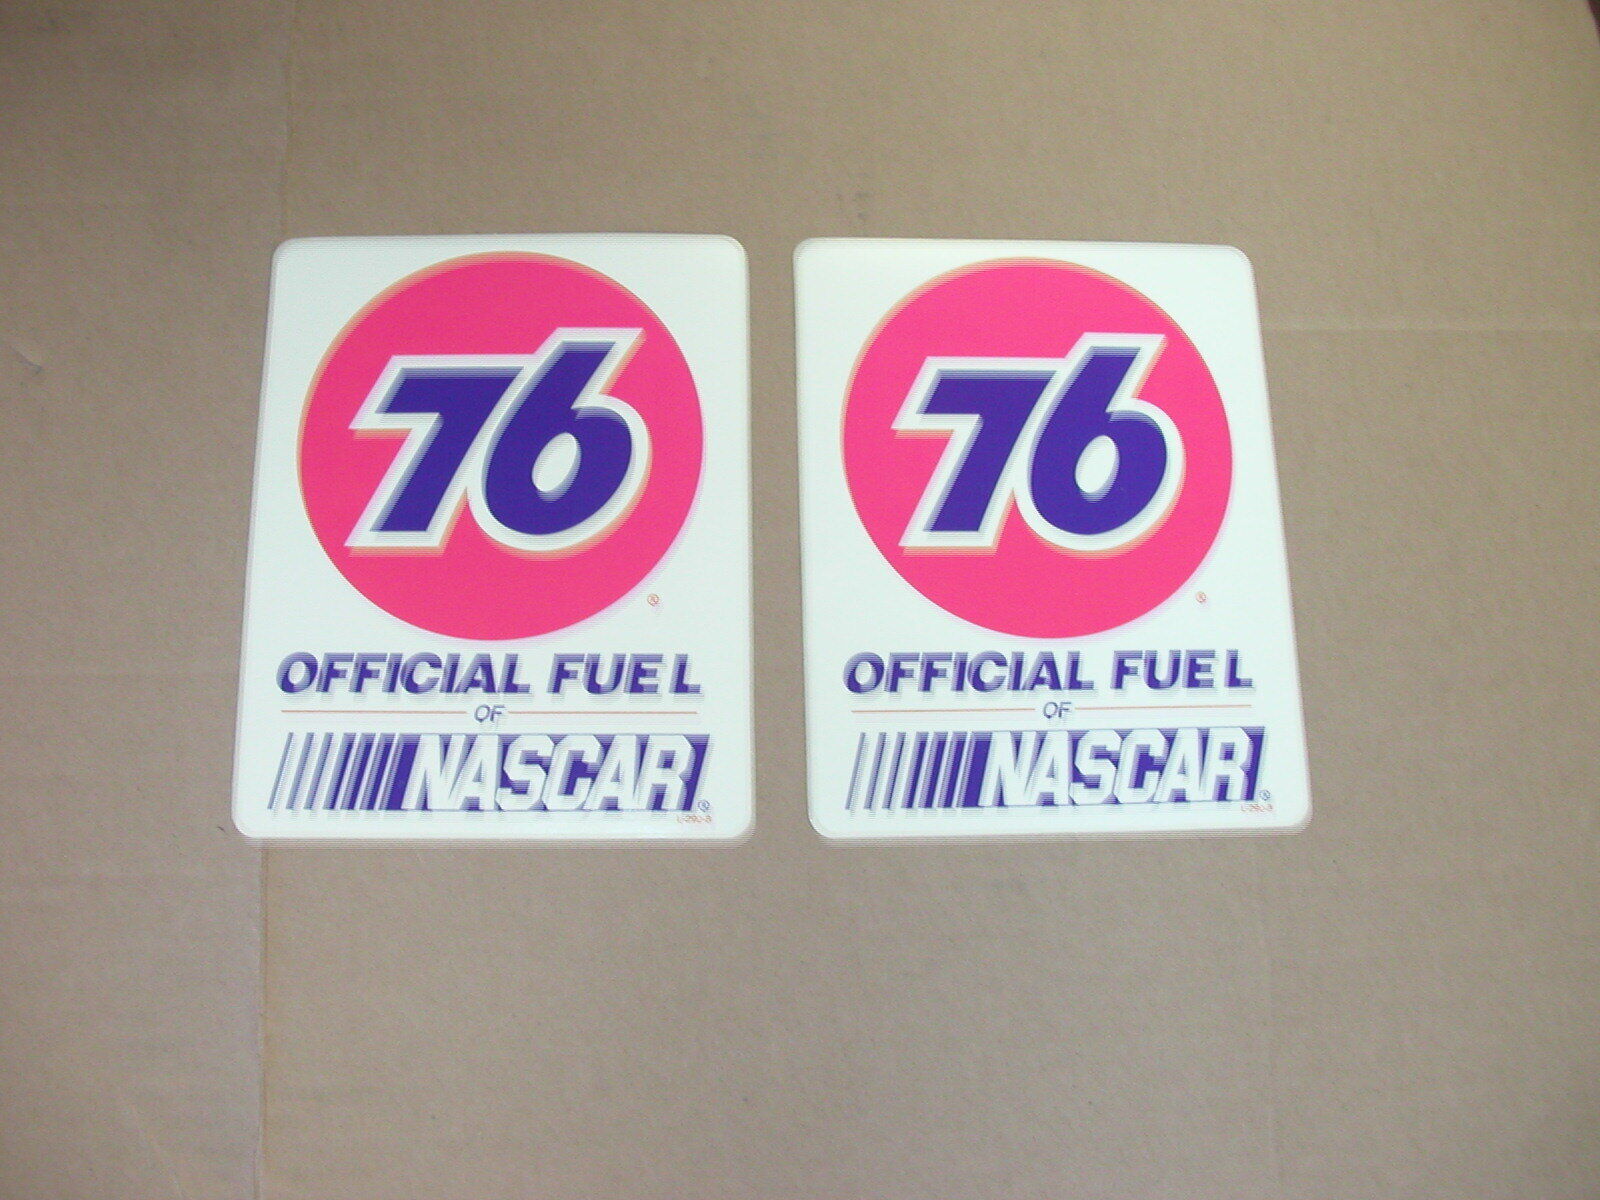 UNION 76 RACING FUEL UNOCAL NASCAR RACING DECAL STICKER PACKAGE OF 2